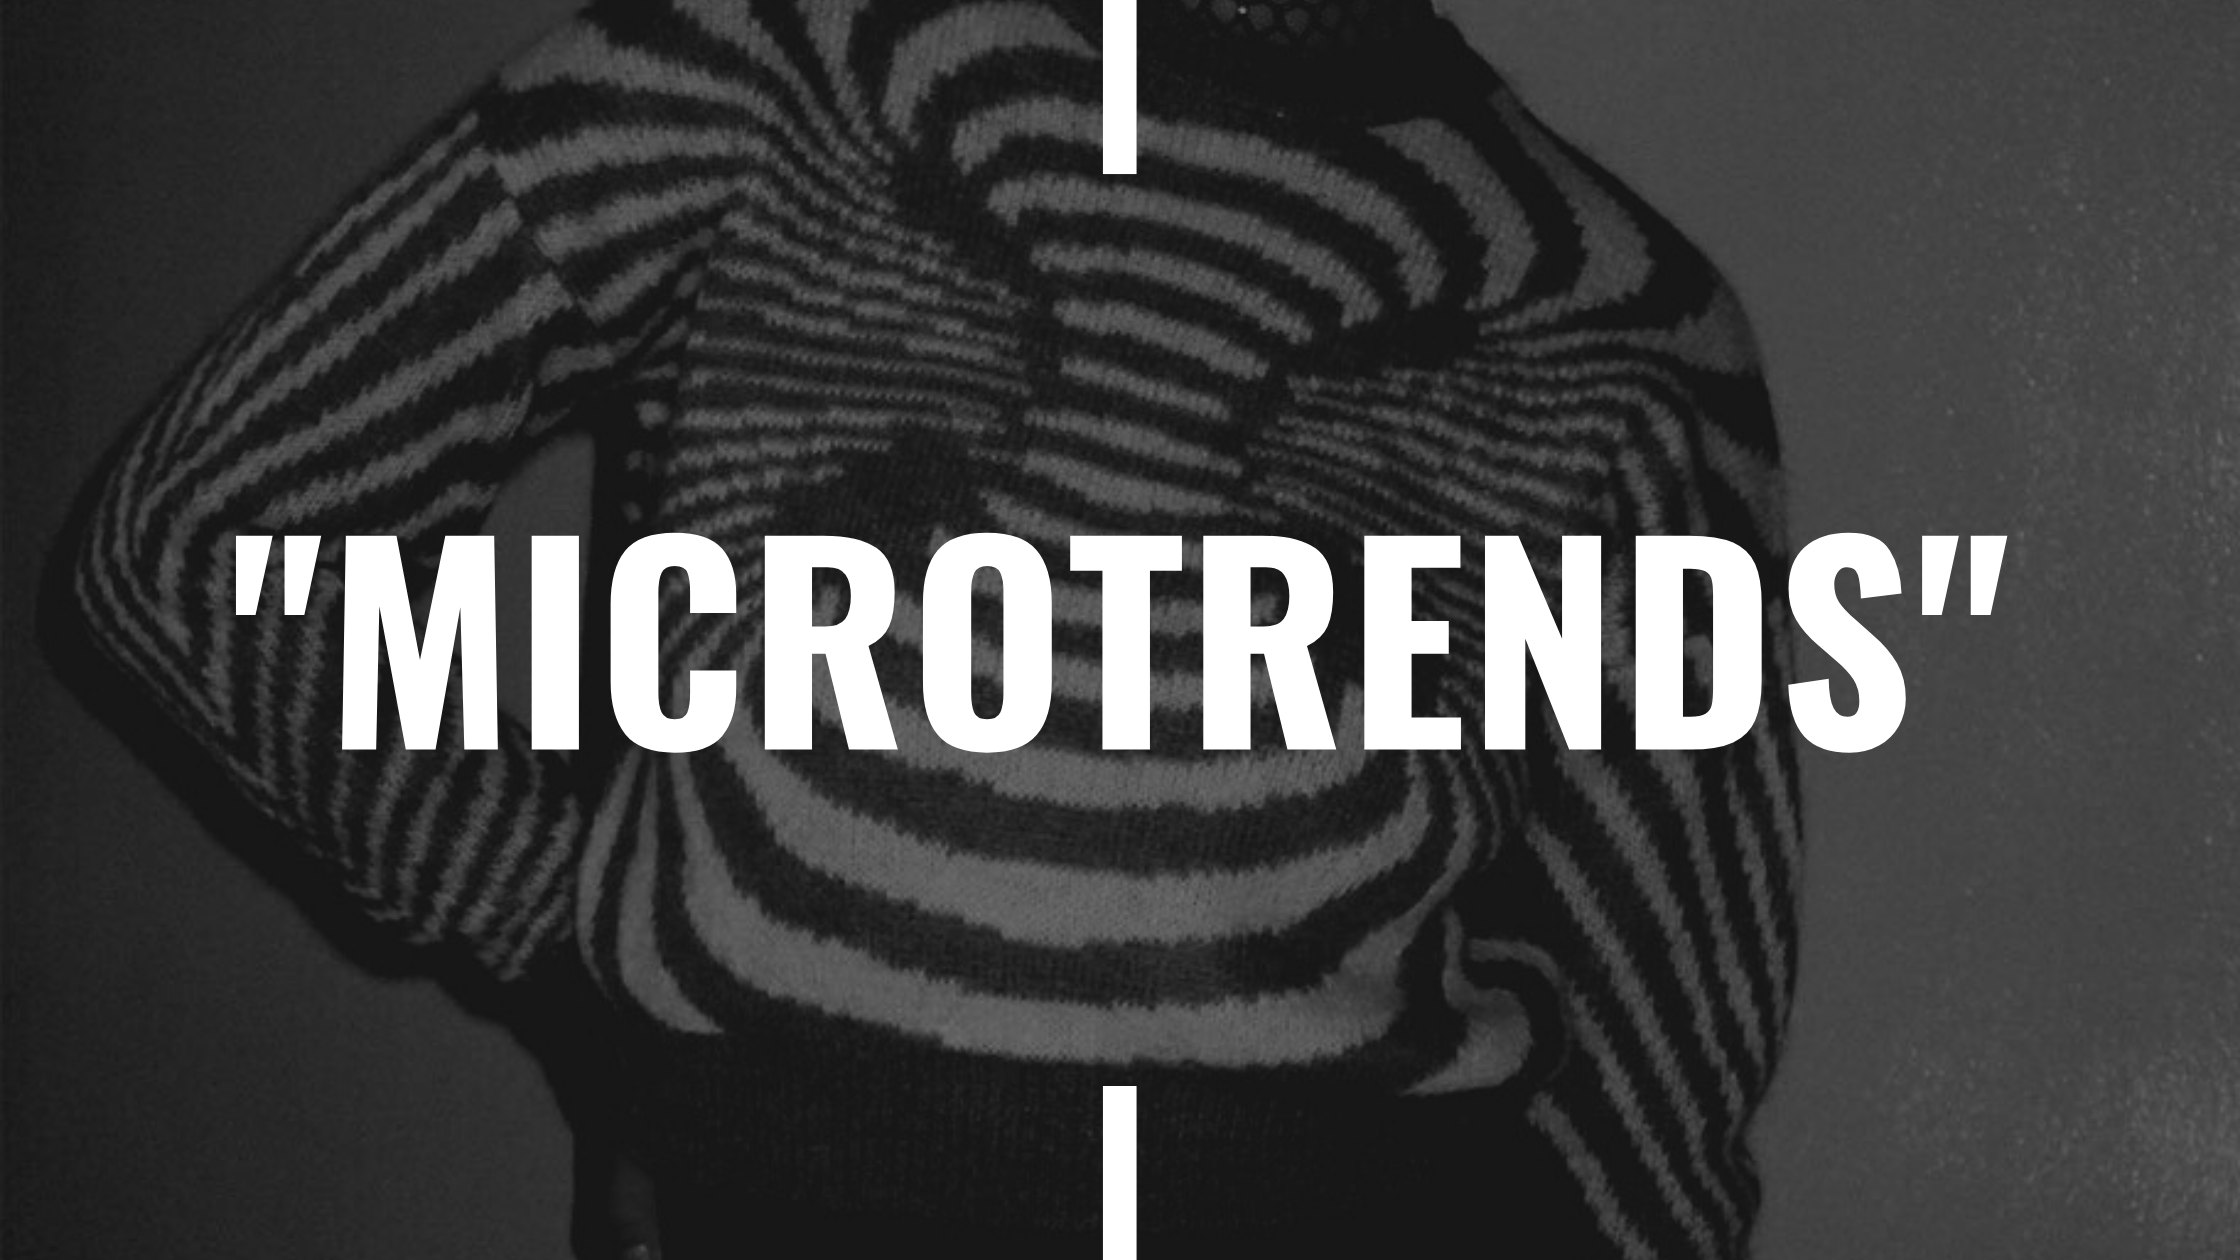 In Defense of the "Micro-Trend."